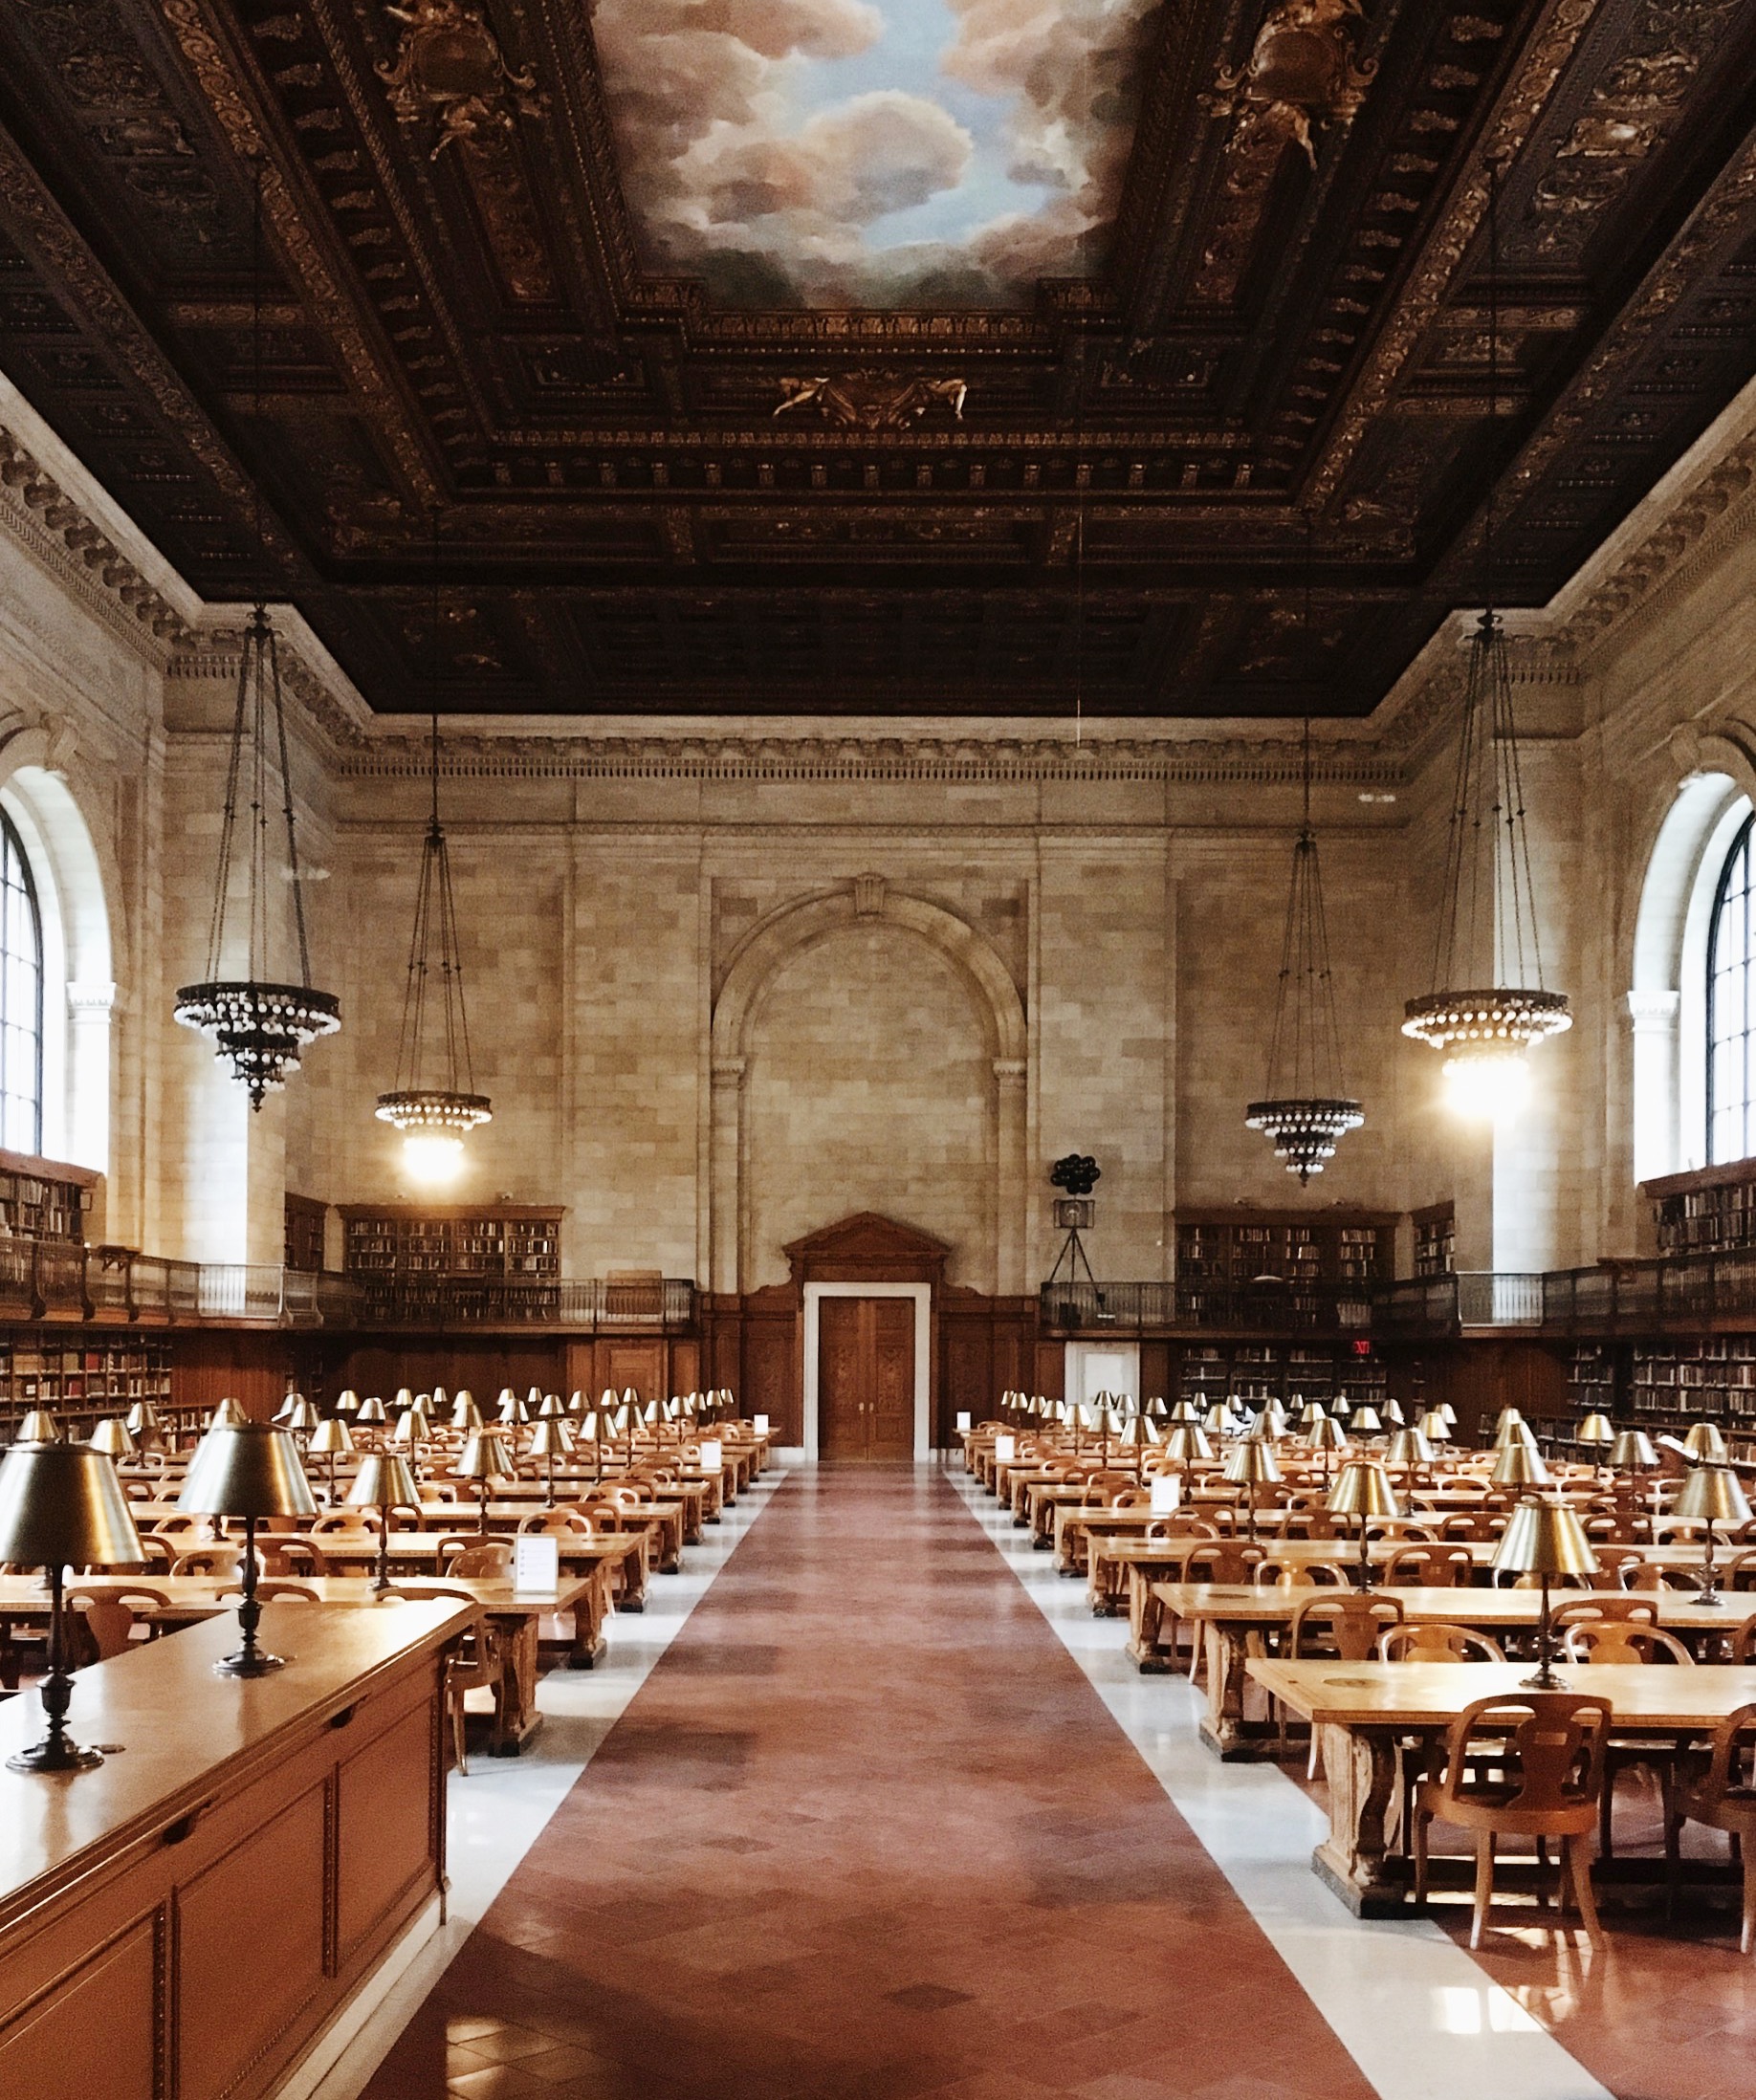 The renovated New York Public Library Rose Reading Room